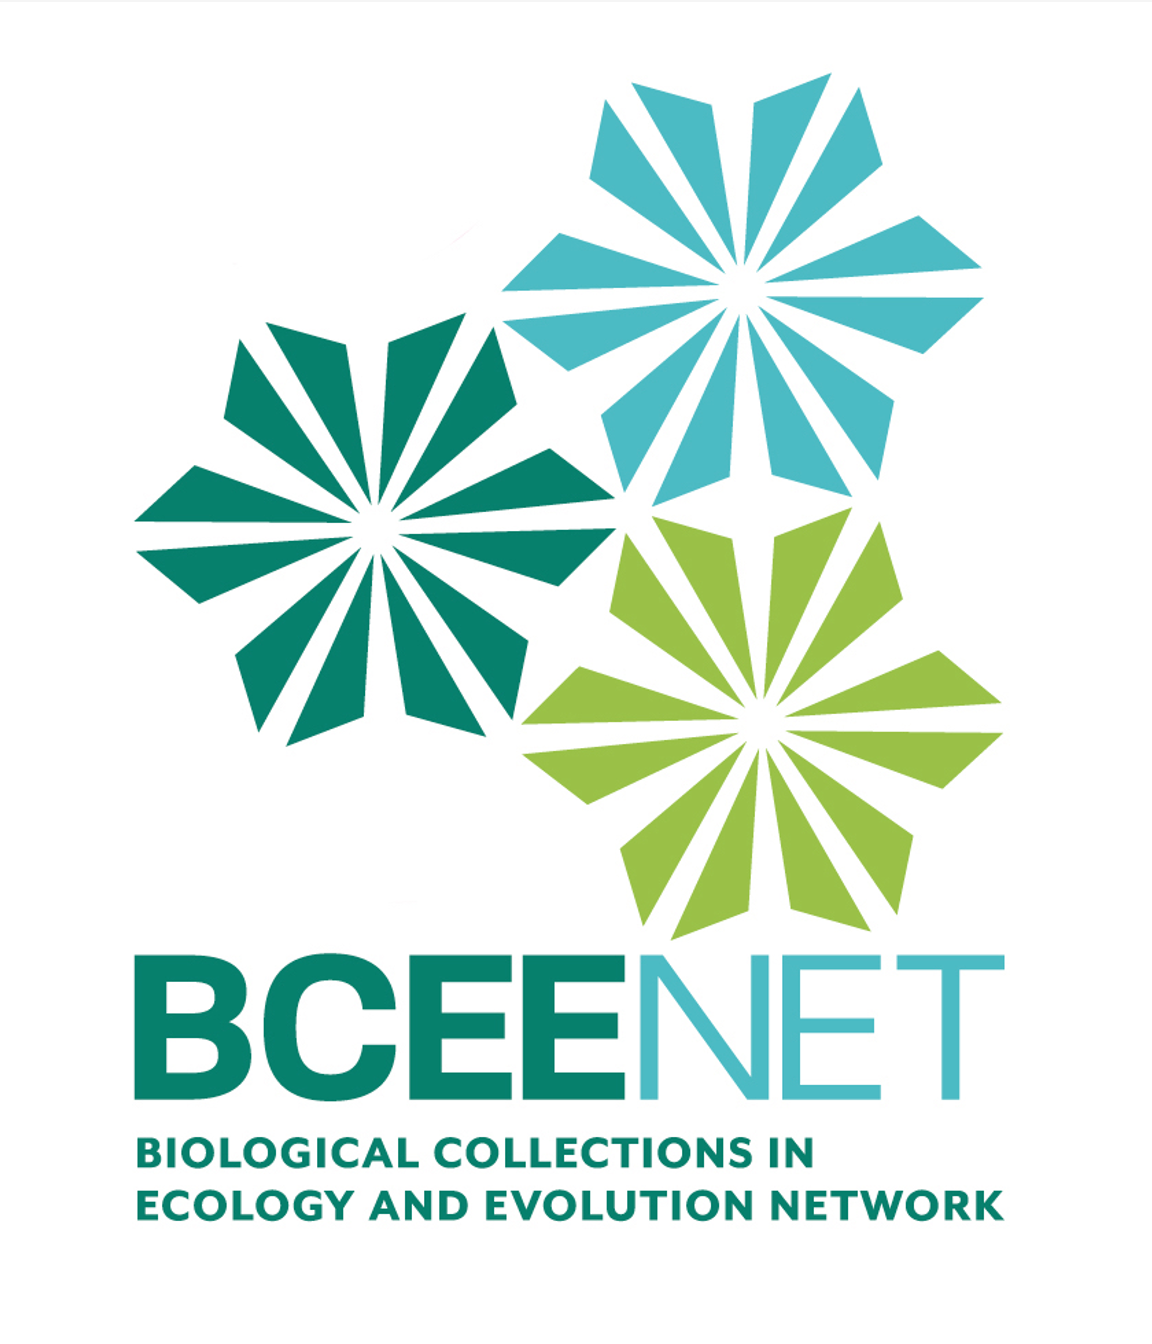 BCEENET- Biological Collections in Ecology & Evolution Network group image